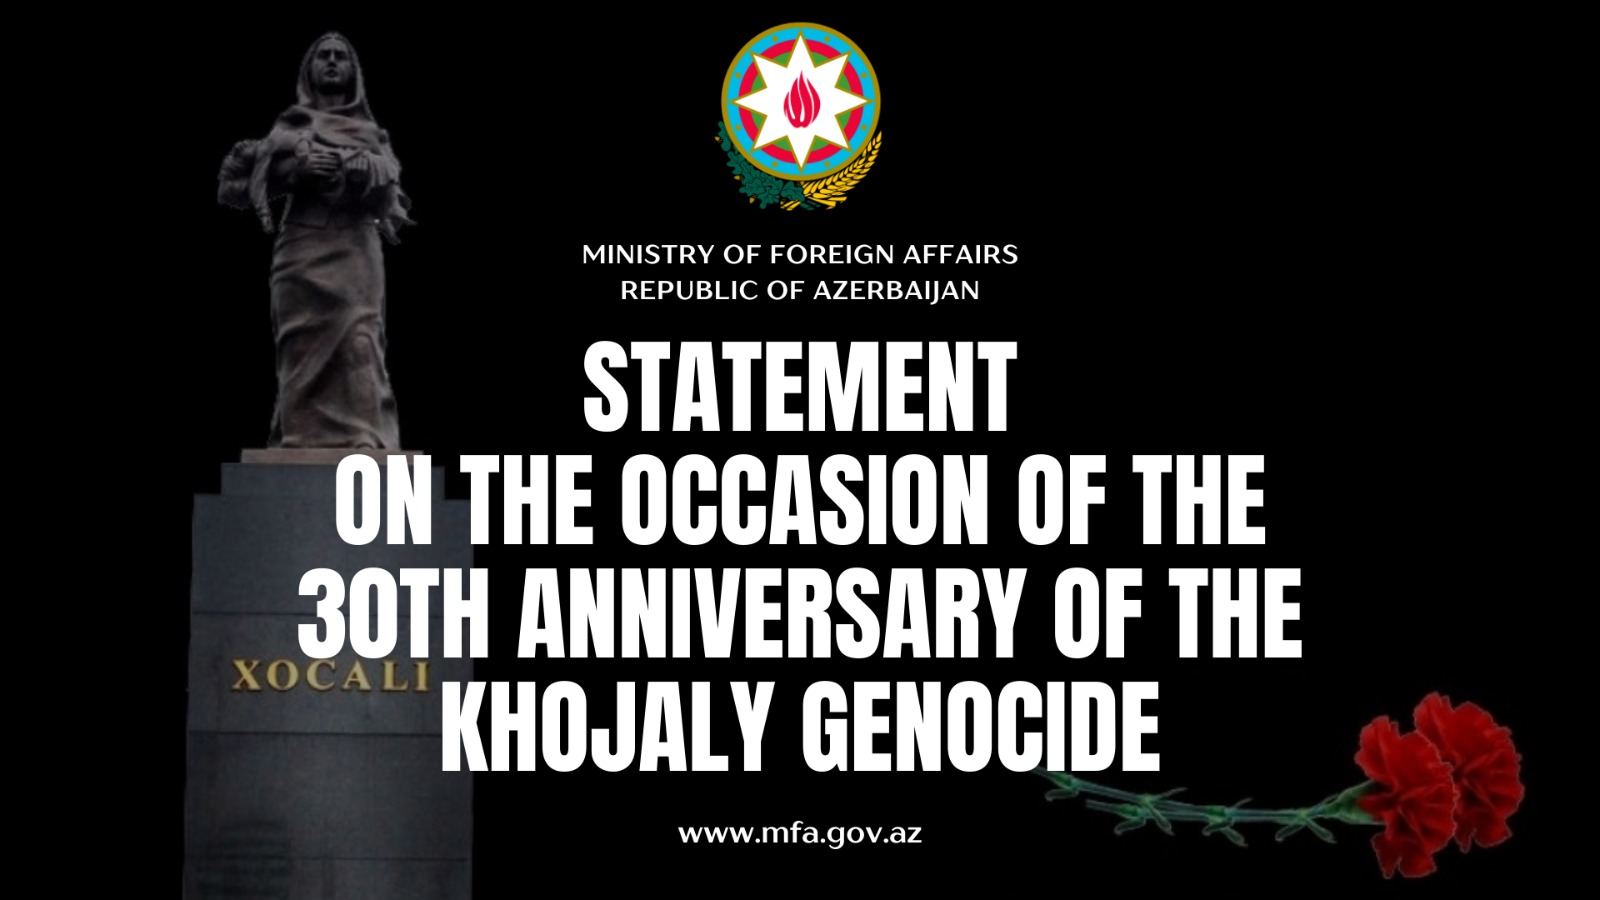 Killings of civilians at Khojaly stemmed from policy of ethnic hatred against Azerbaijanis at state level in Armenia - MFA